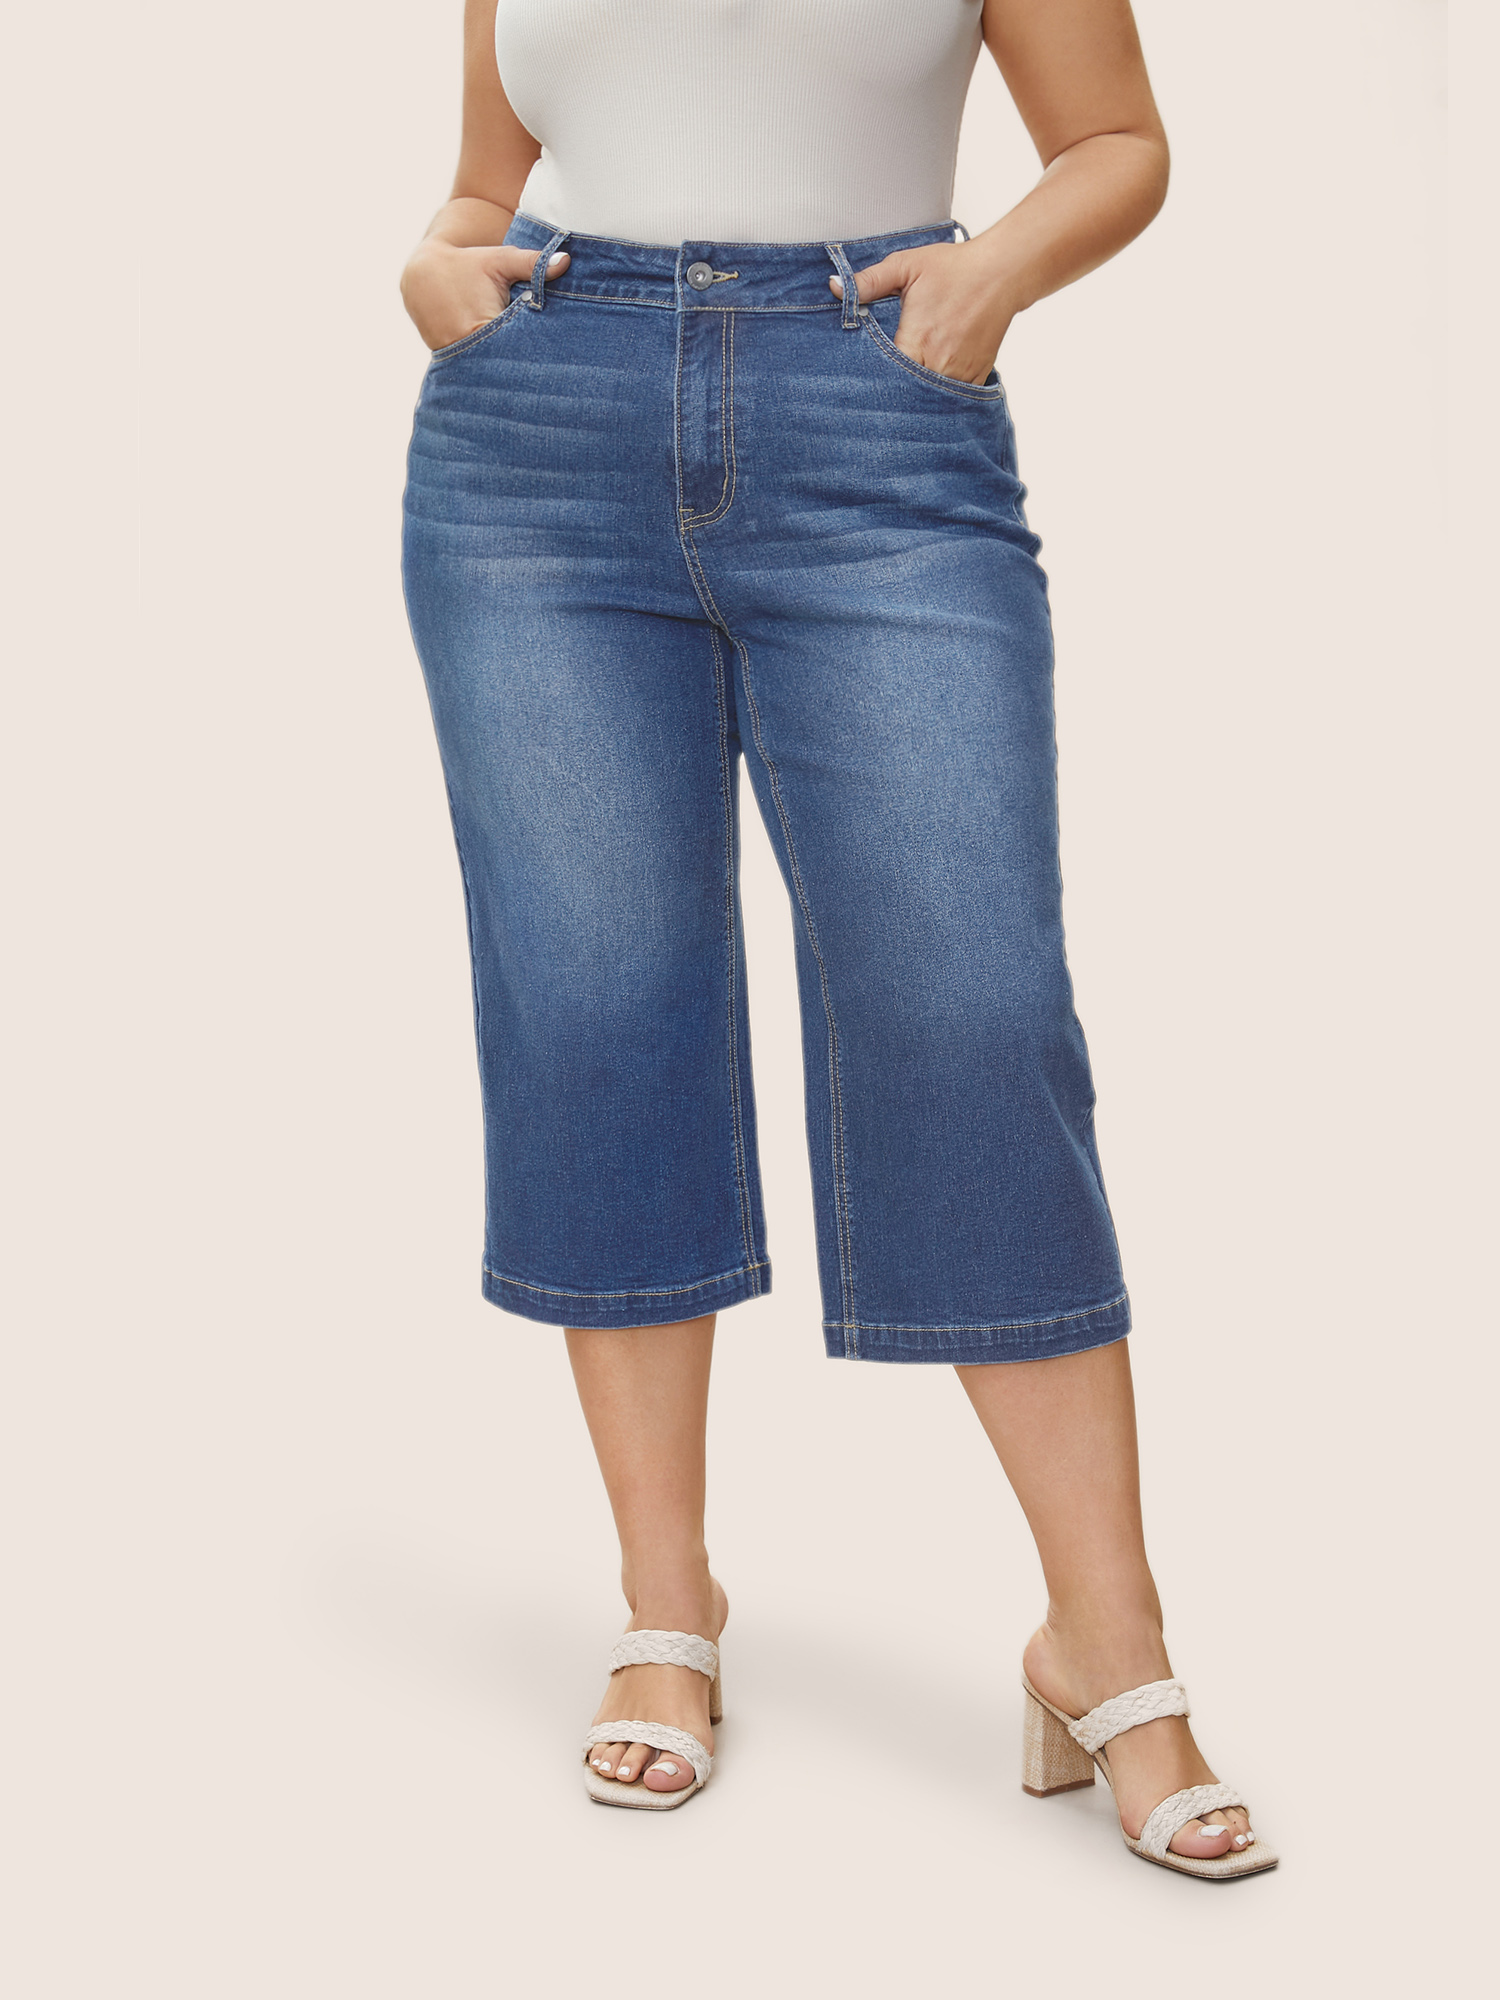 

Plus Size Medium Wash Wide Leg Cropped Jeans Women Midblue Casual Plain Button High stretch Slanted pocket Jeans BloomChic